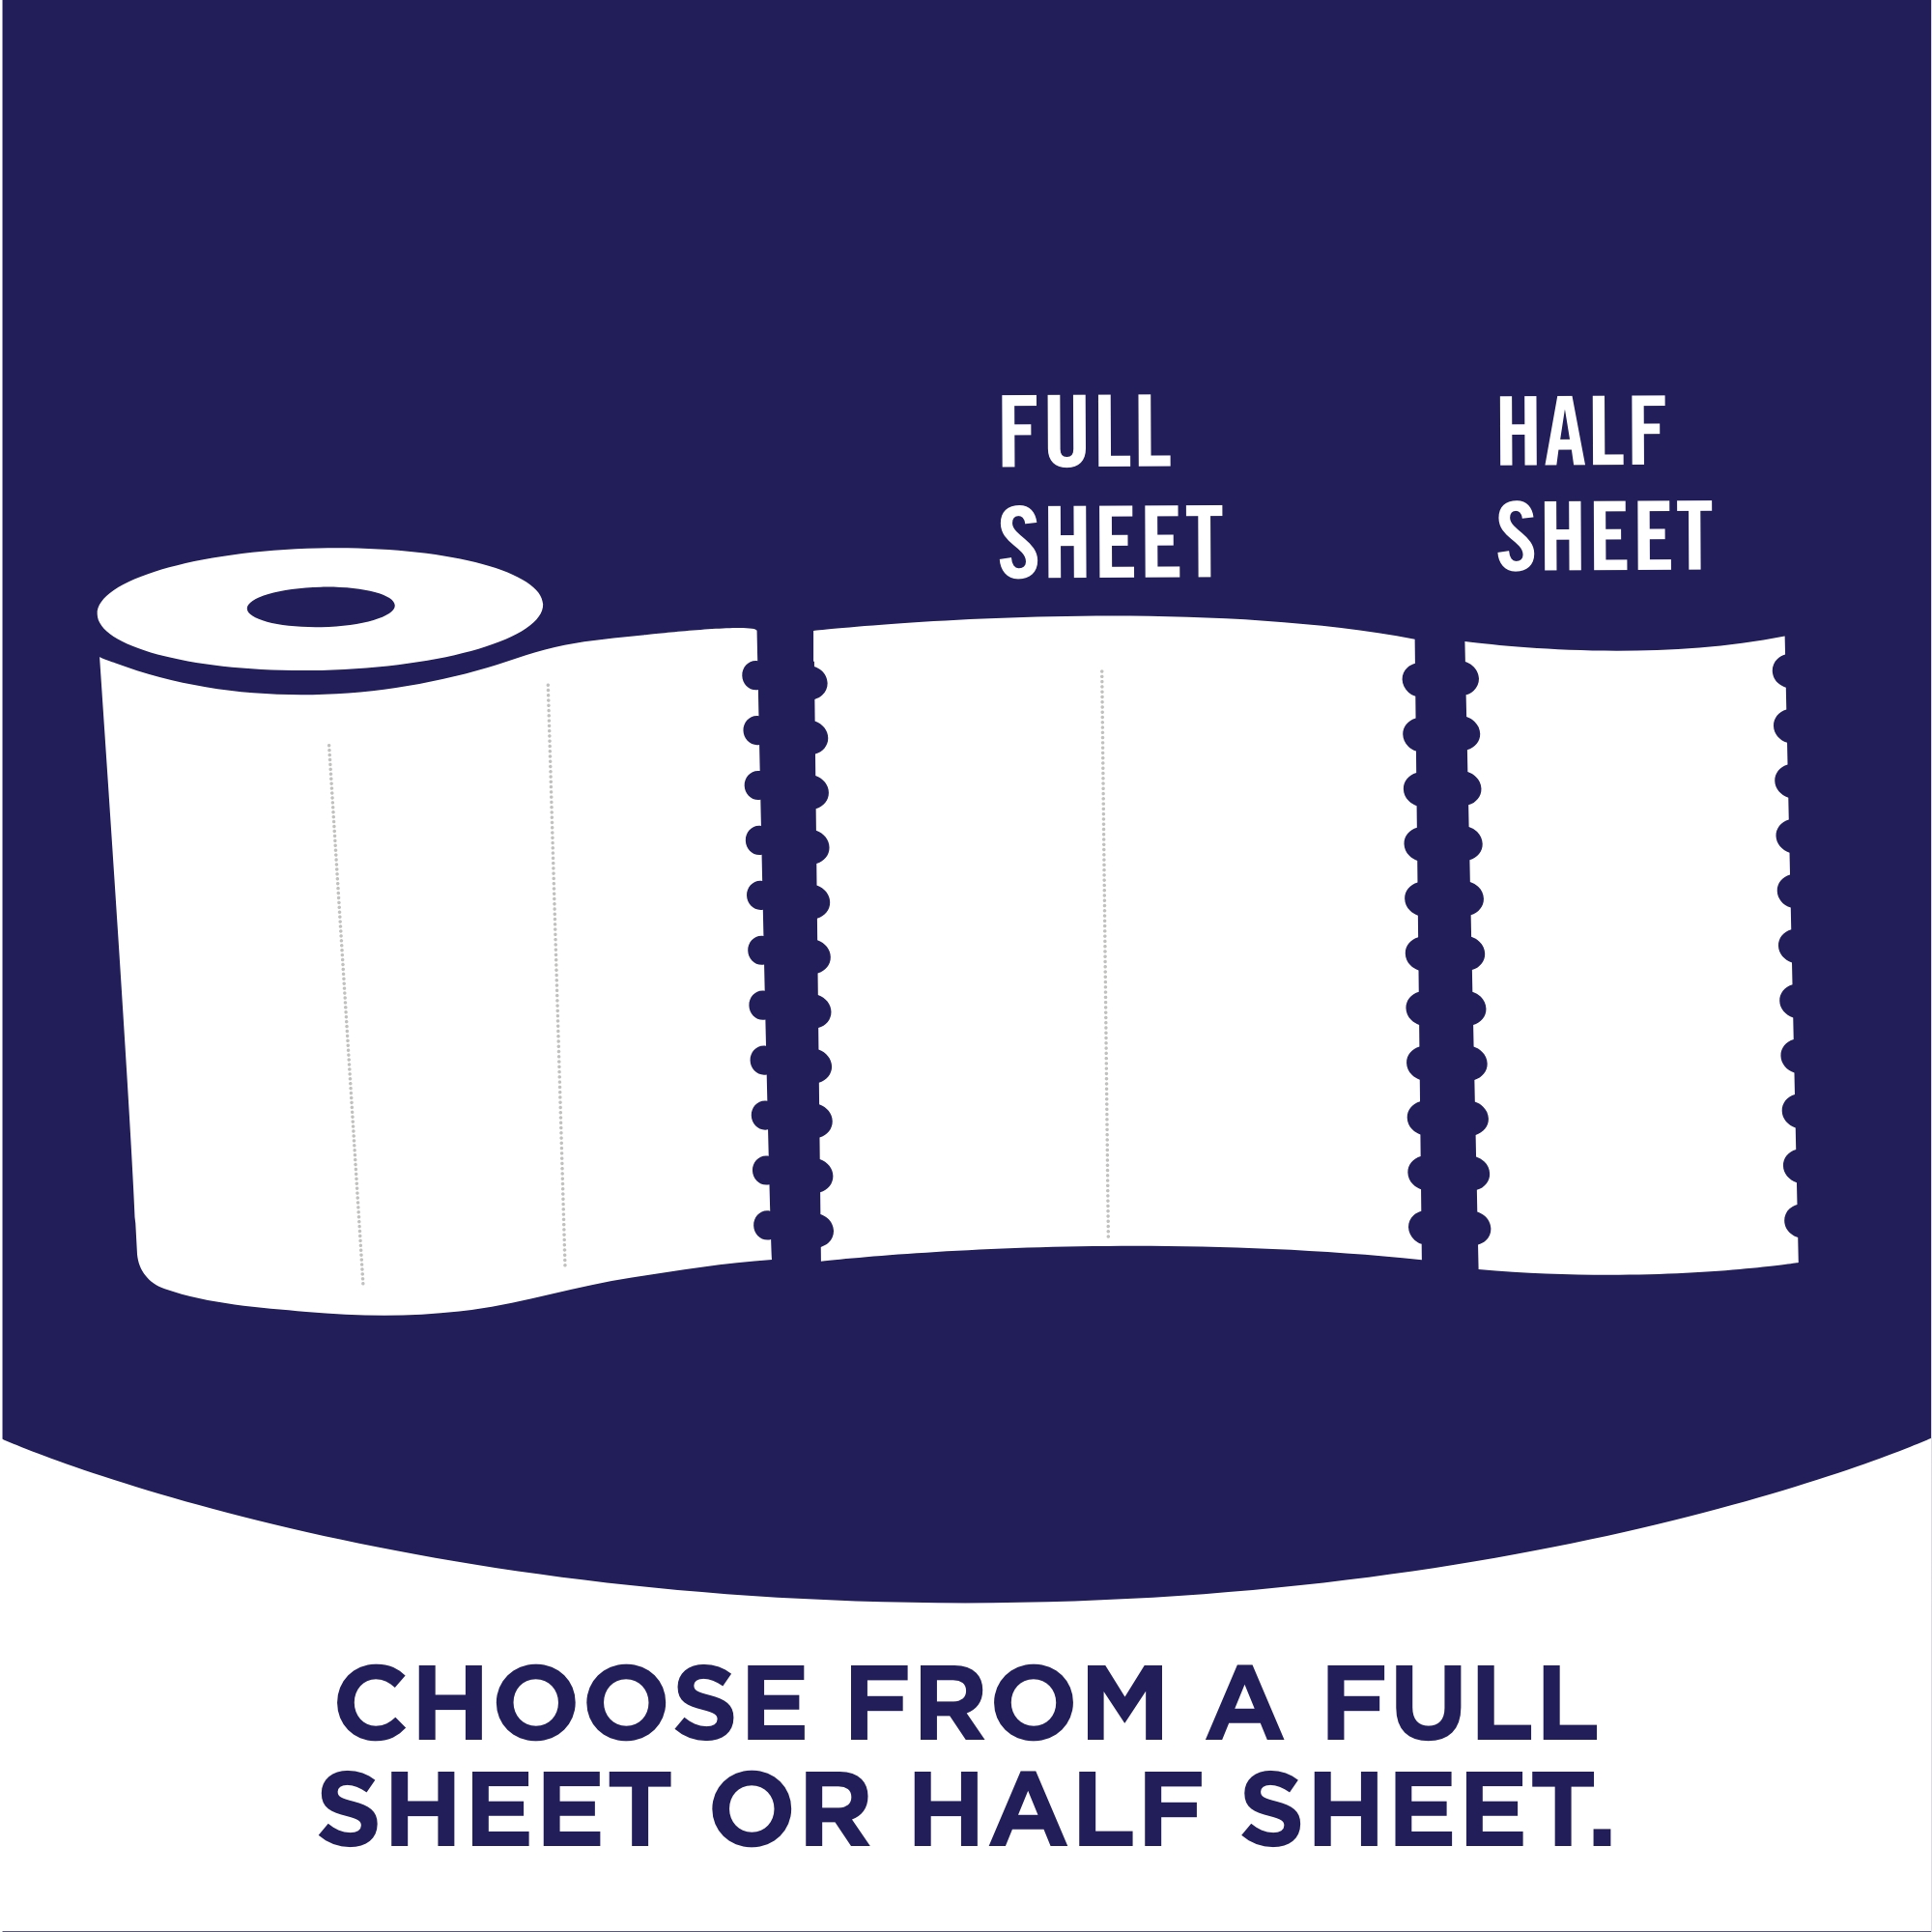 Sparkle Pick-A-Size Paper Towels, White, 4 Double Rolls = 8 Regular Rolls, 126 2-Ply Sheets Per Roll - image 3 of 17